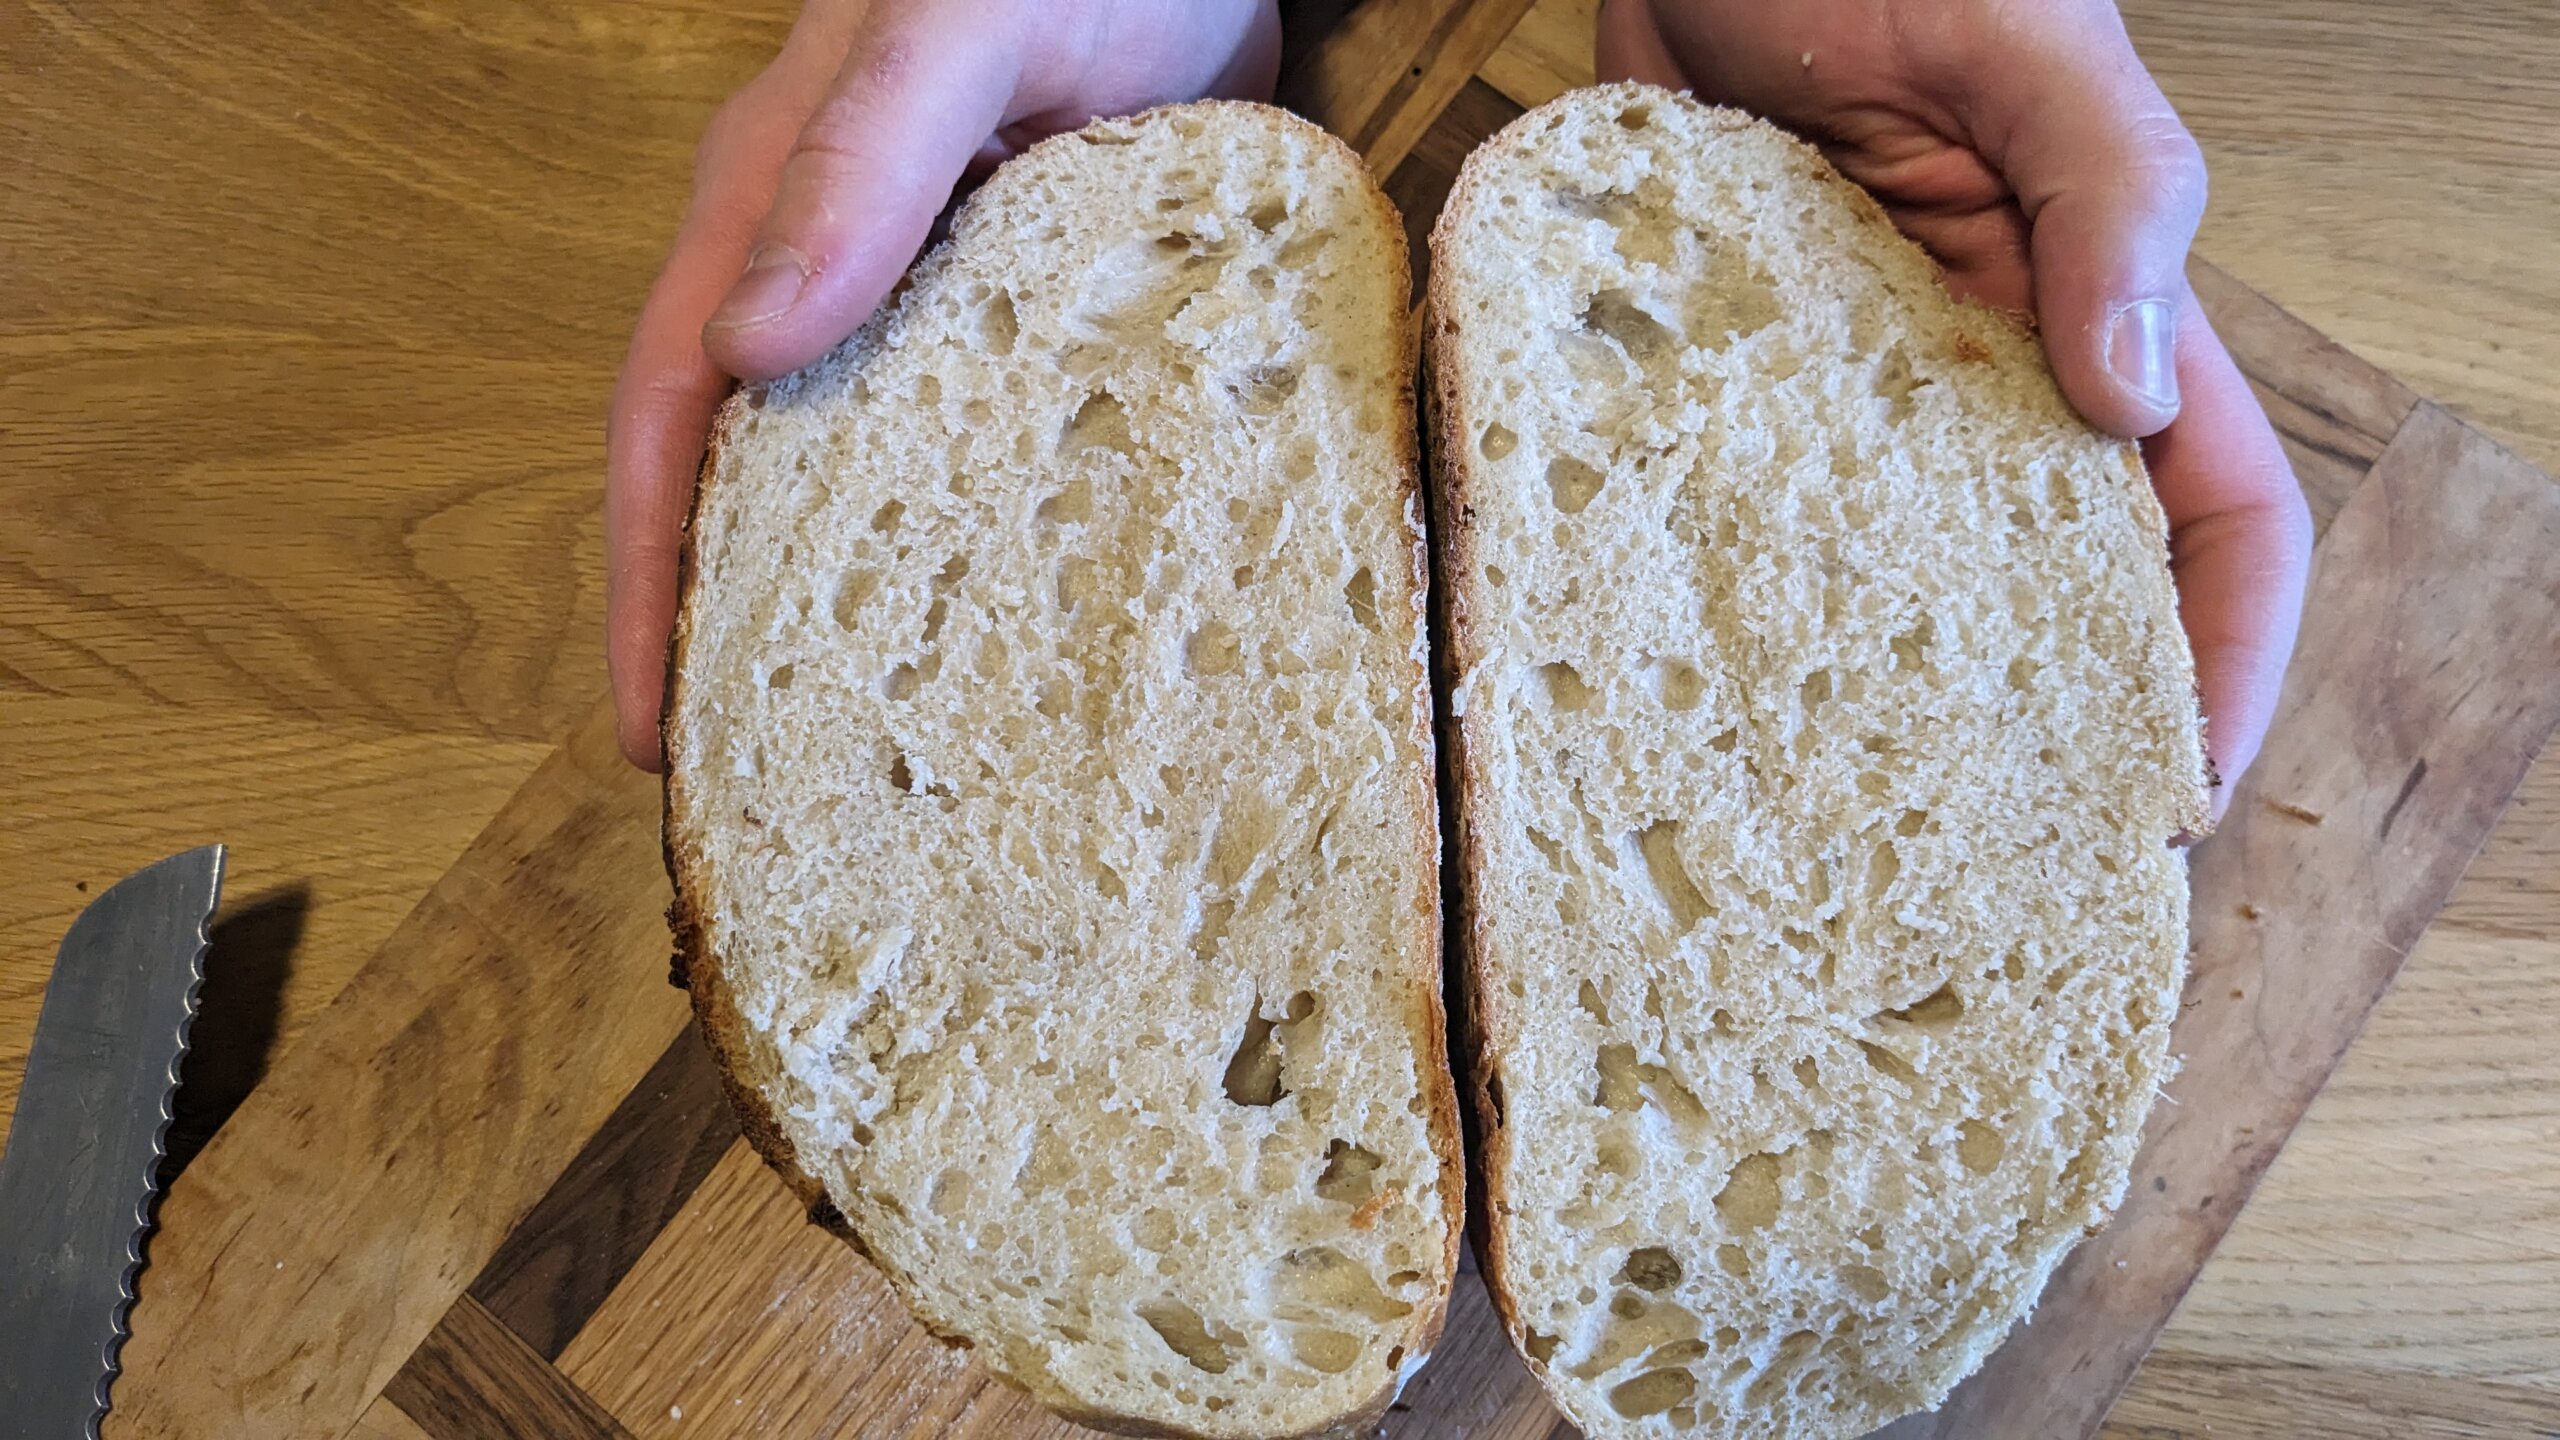 man holding two halves of an artisan sourdough loaf exposing the crumb